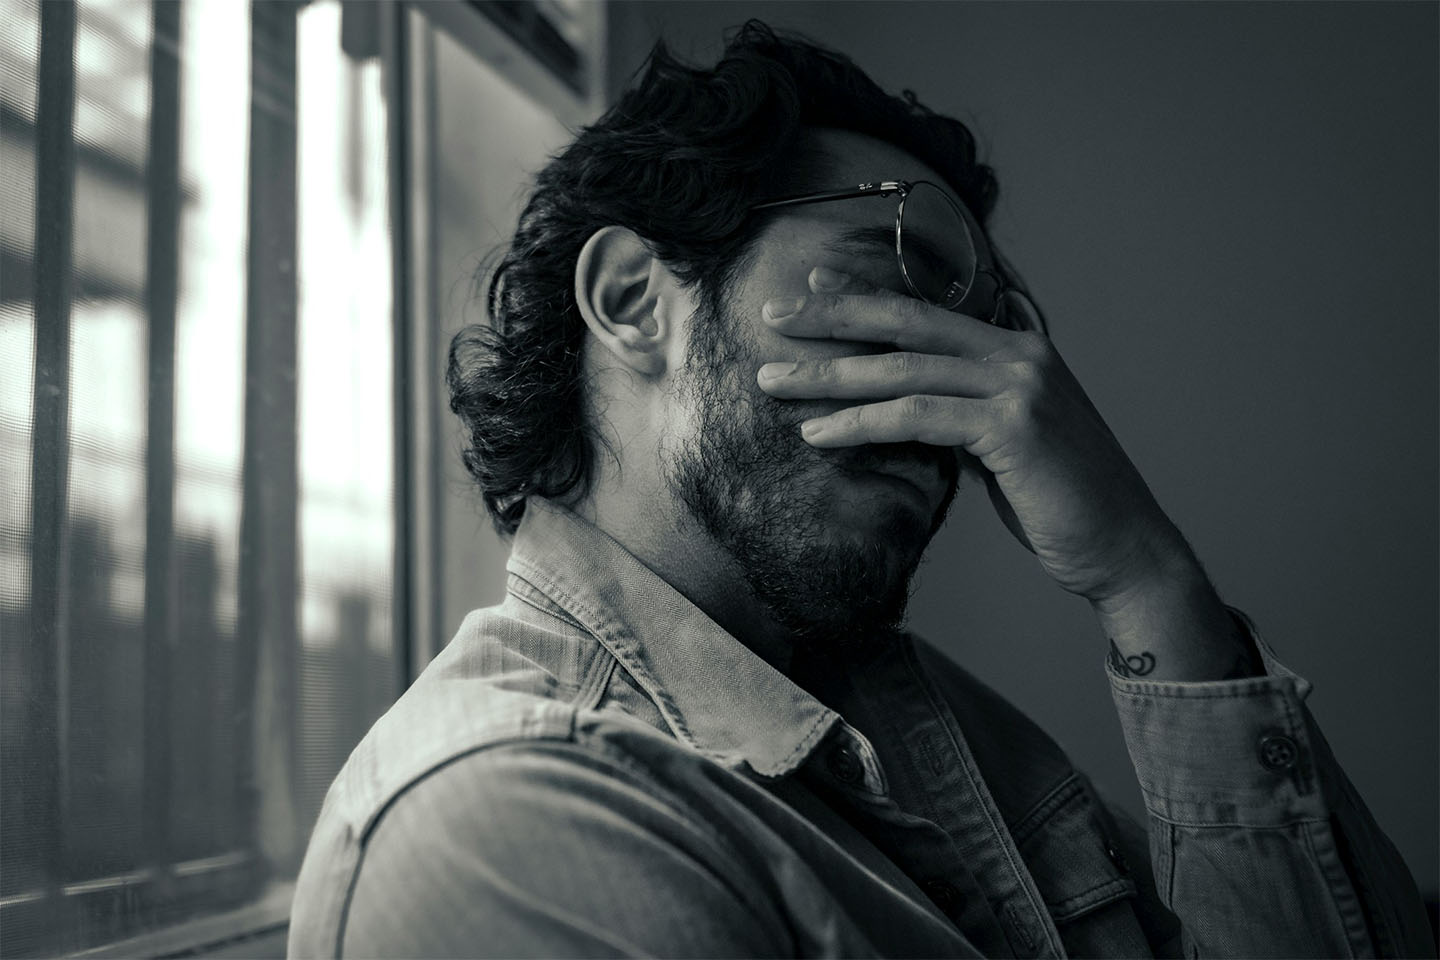 A grayscale photo of a man wearing glasses with his left hand covering his face.